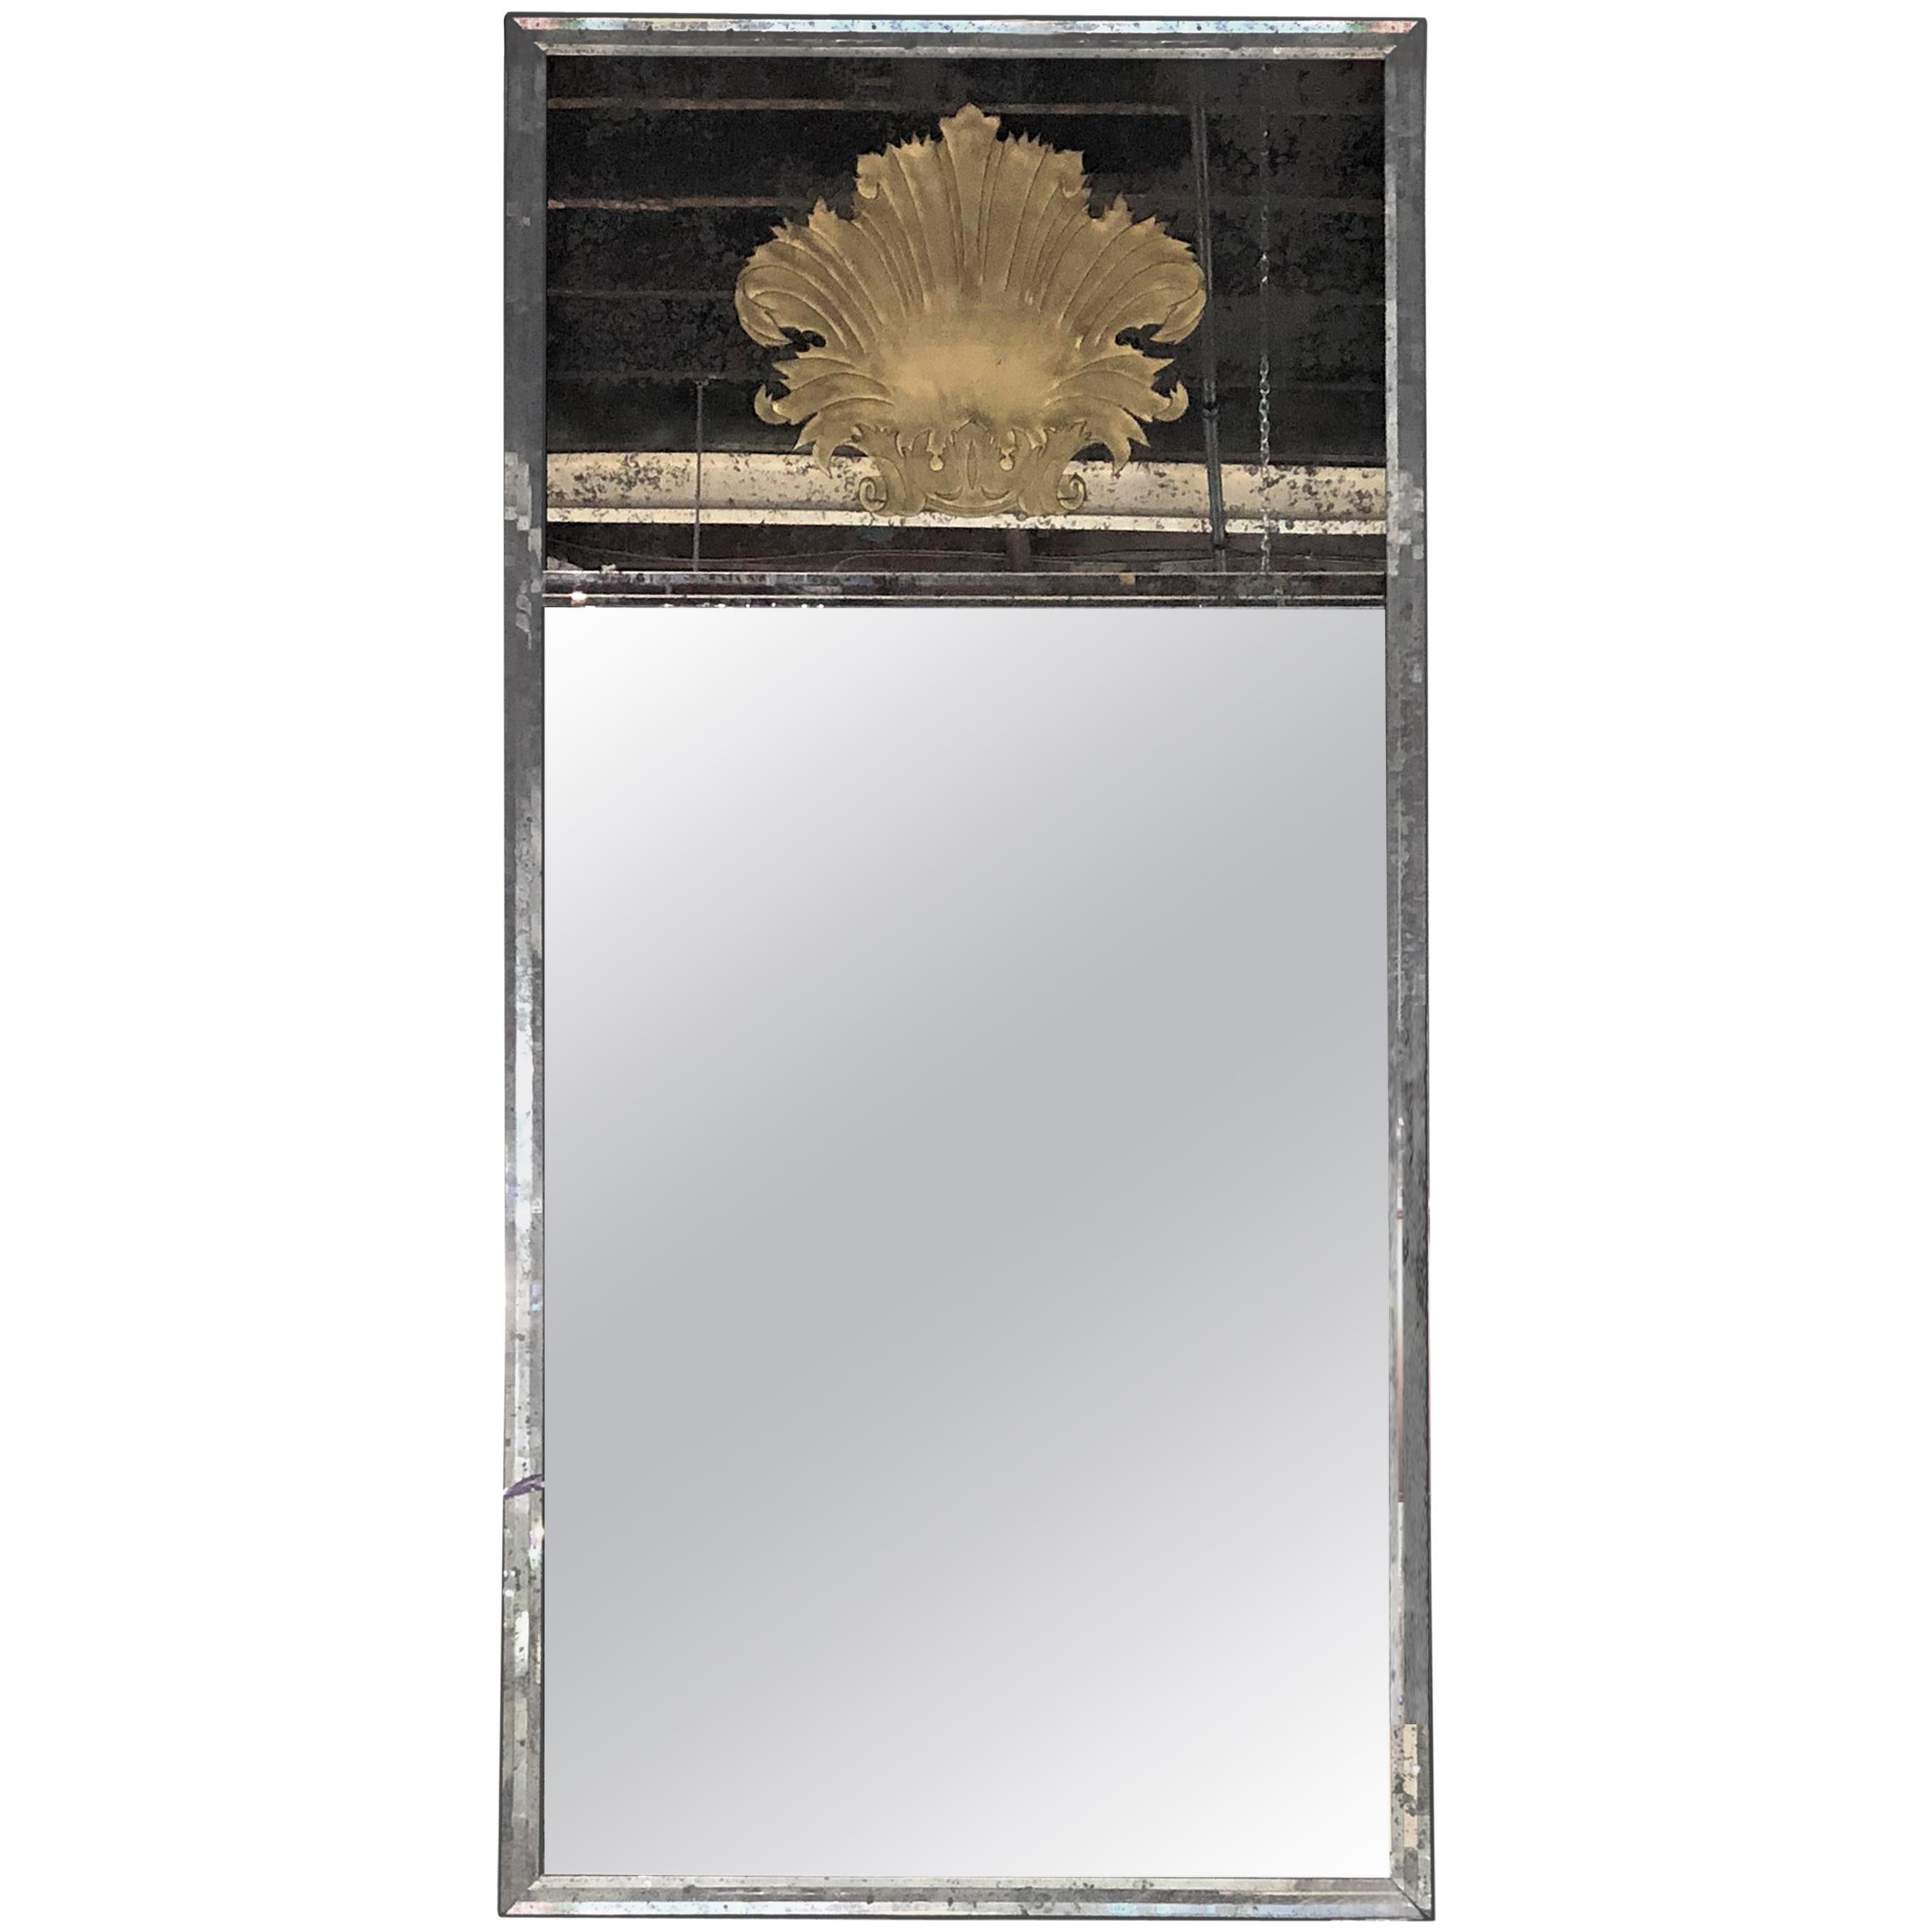 A stunning pair of etched glass metal framed custom gilt shell designed mirrors. Each of these palatial wall or console mirrors depicts the Hollywood Regency and Art Deco era at its most grandeur state. Set in a solid steel frame the center mirror